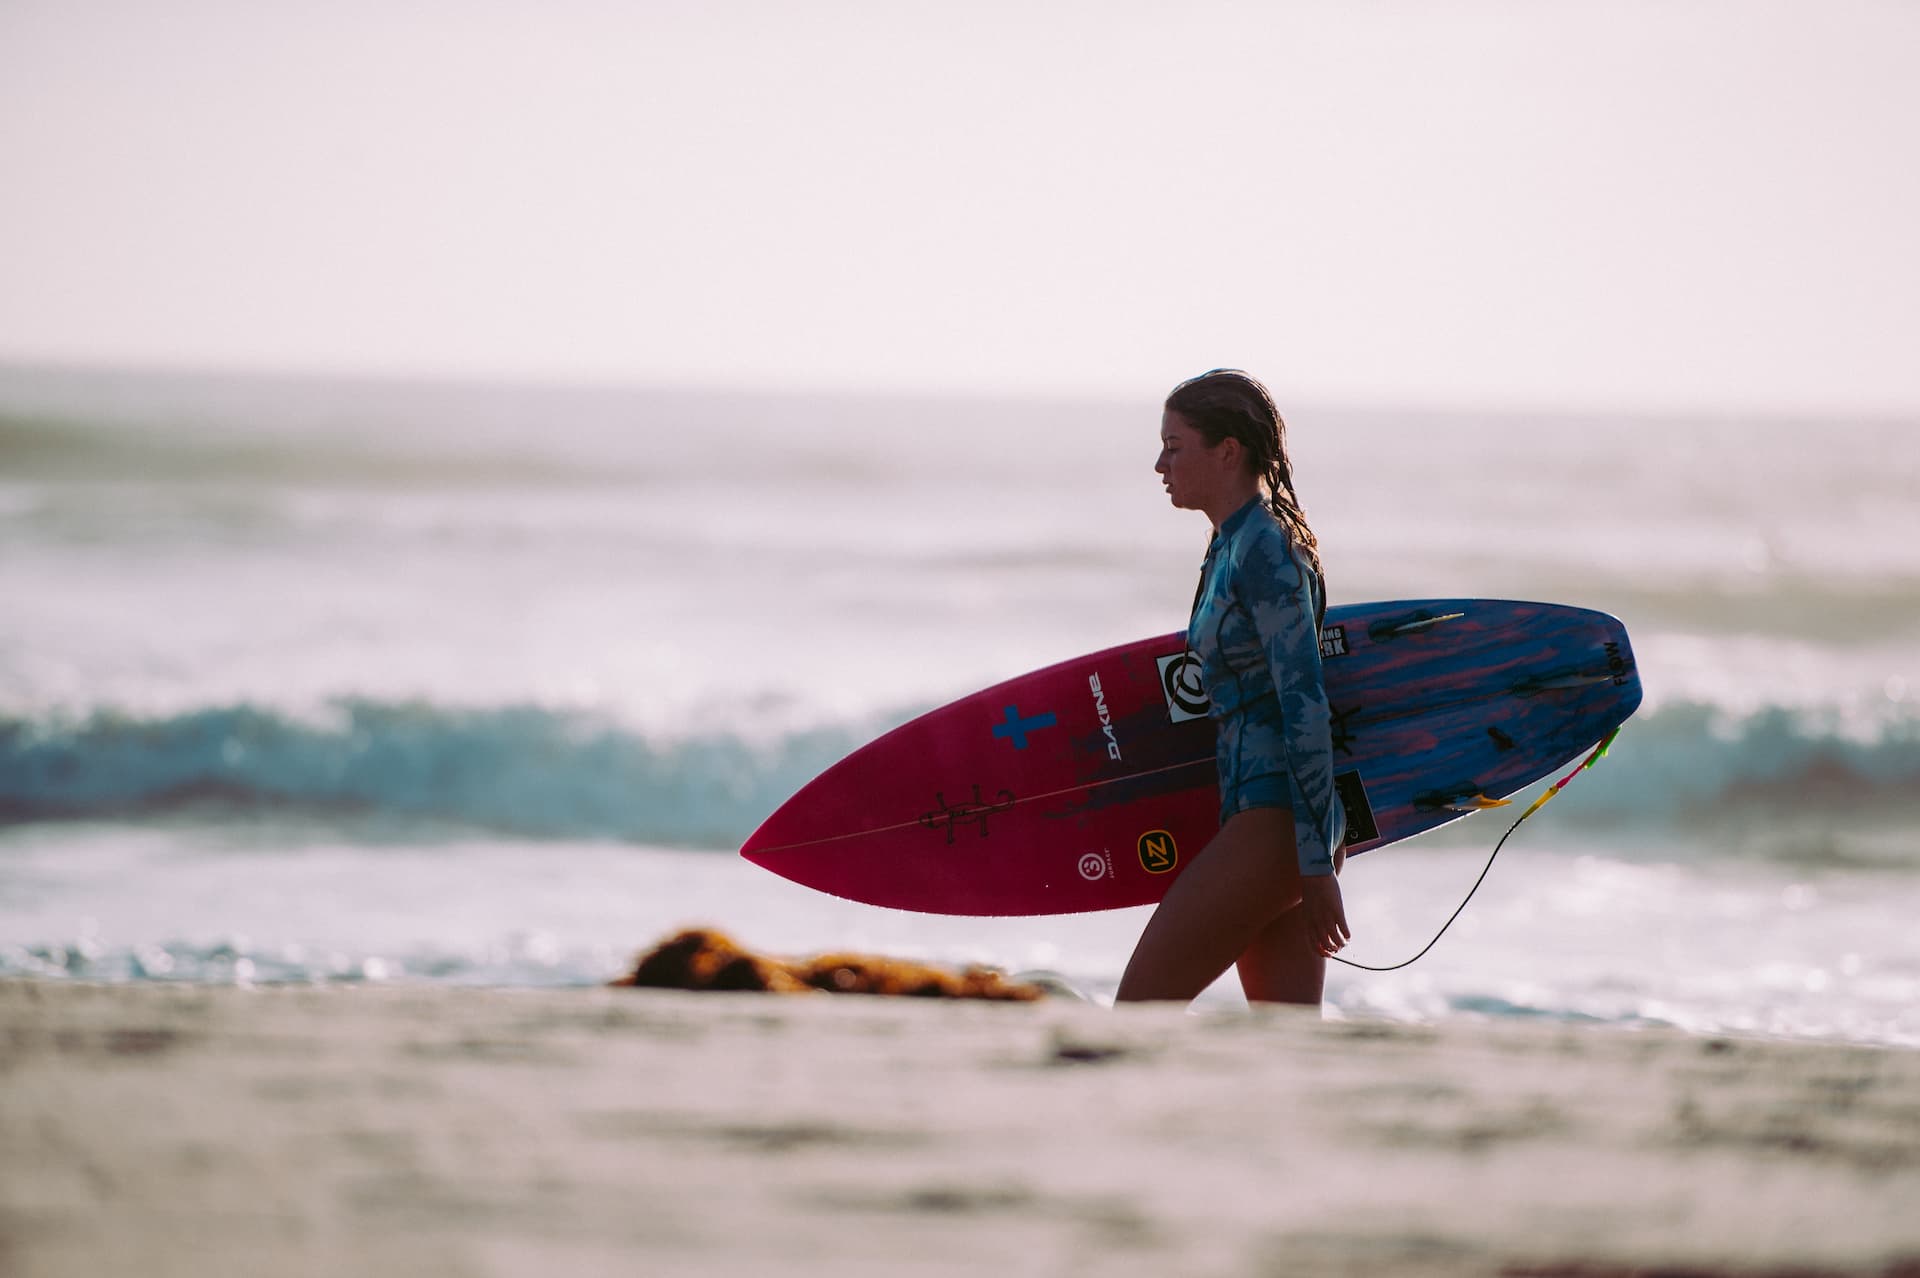 learning to surf at 50 